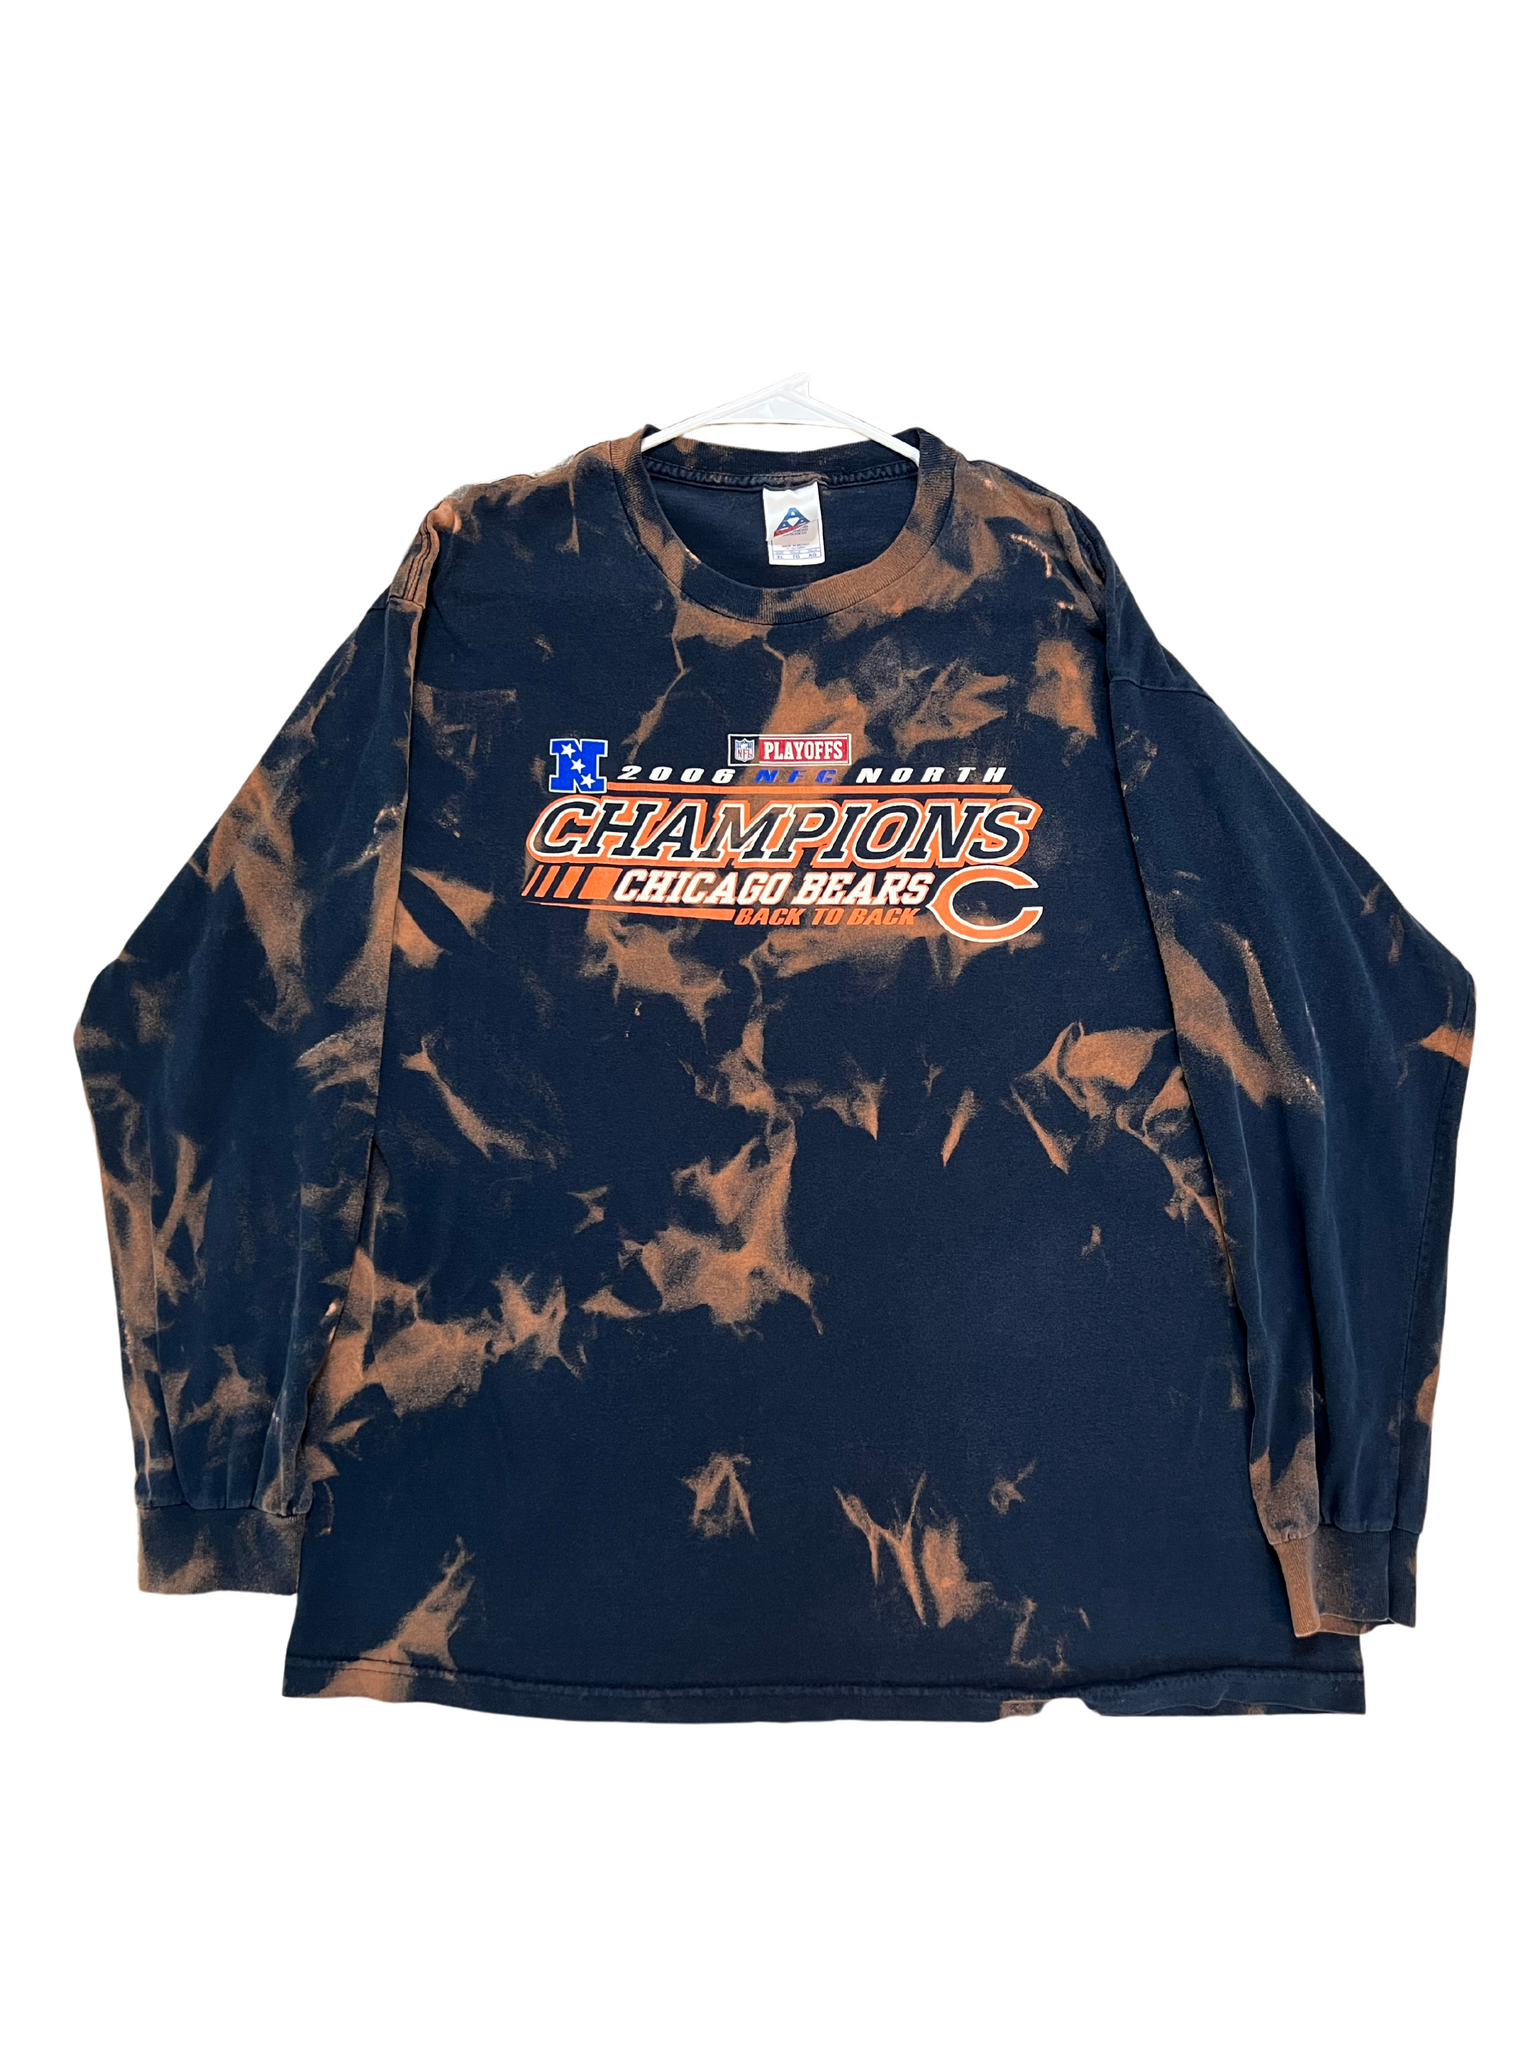 Chicago Bears 2006 NFC North Champions Bleached Long Sleeve Shirt